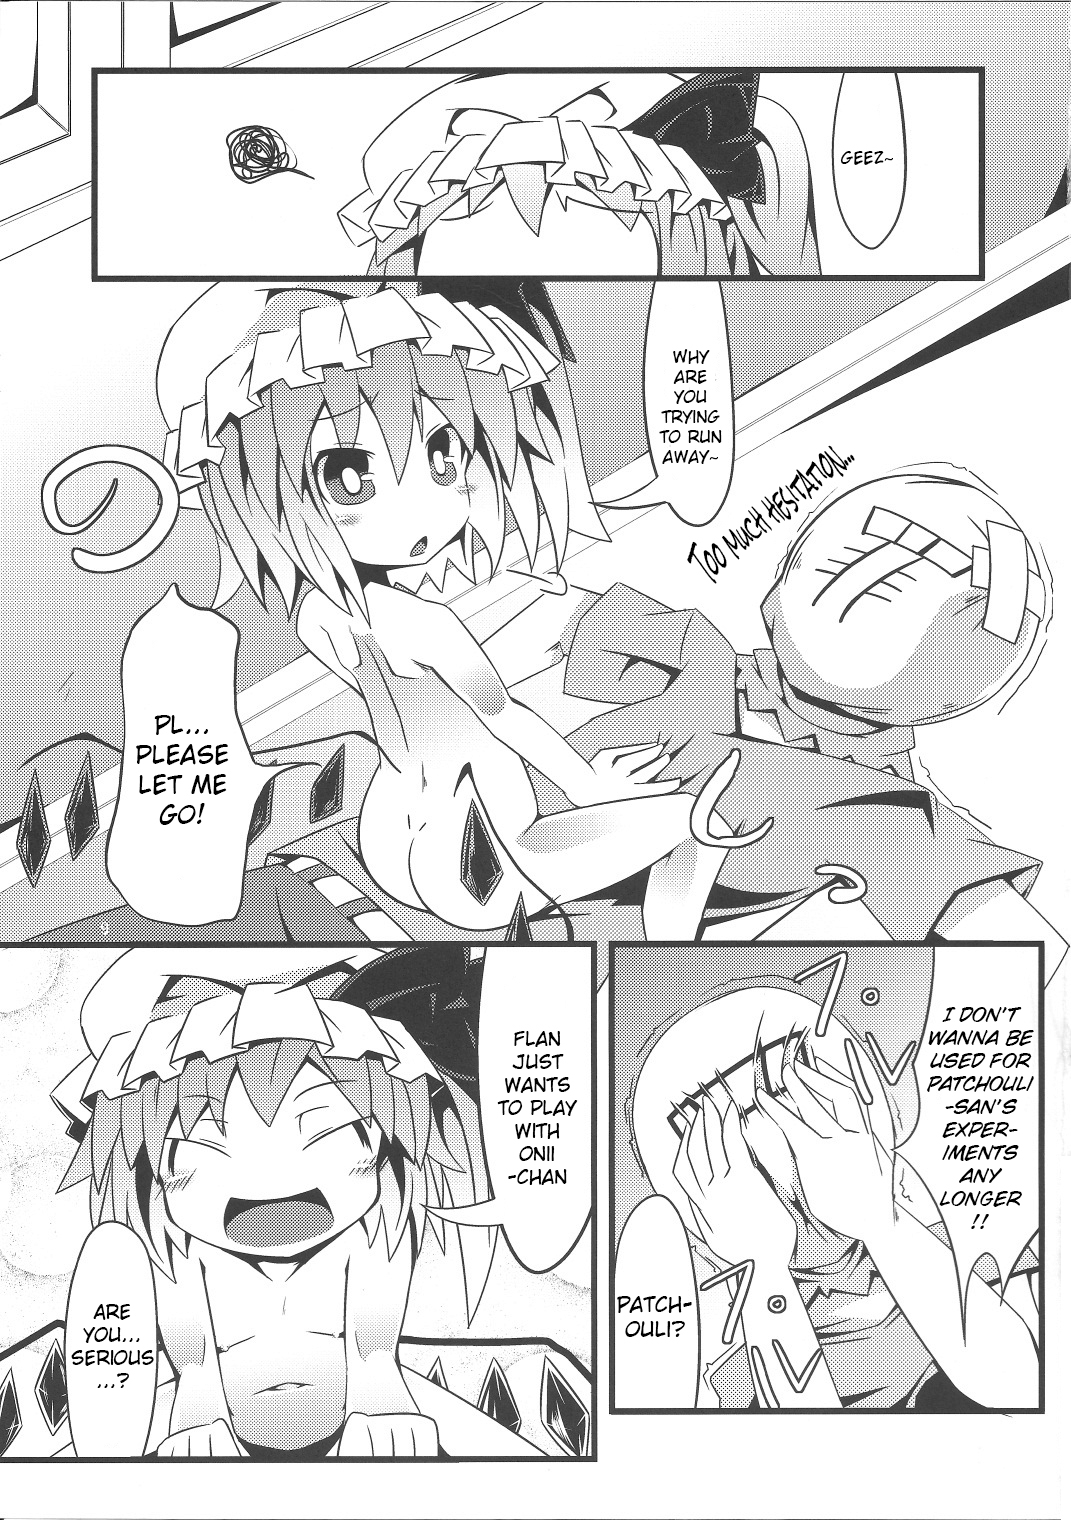 (Kouroumu 7) [Angelic Feather (Land Sale)] Tentacle Play (Touhou Project) [English] page 8 full